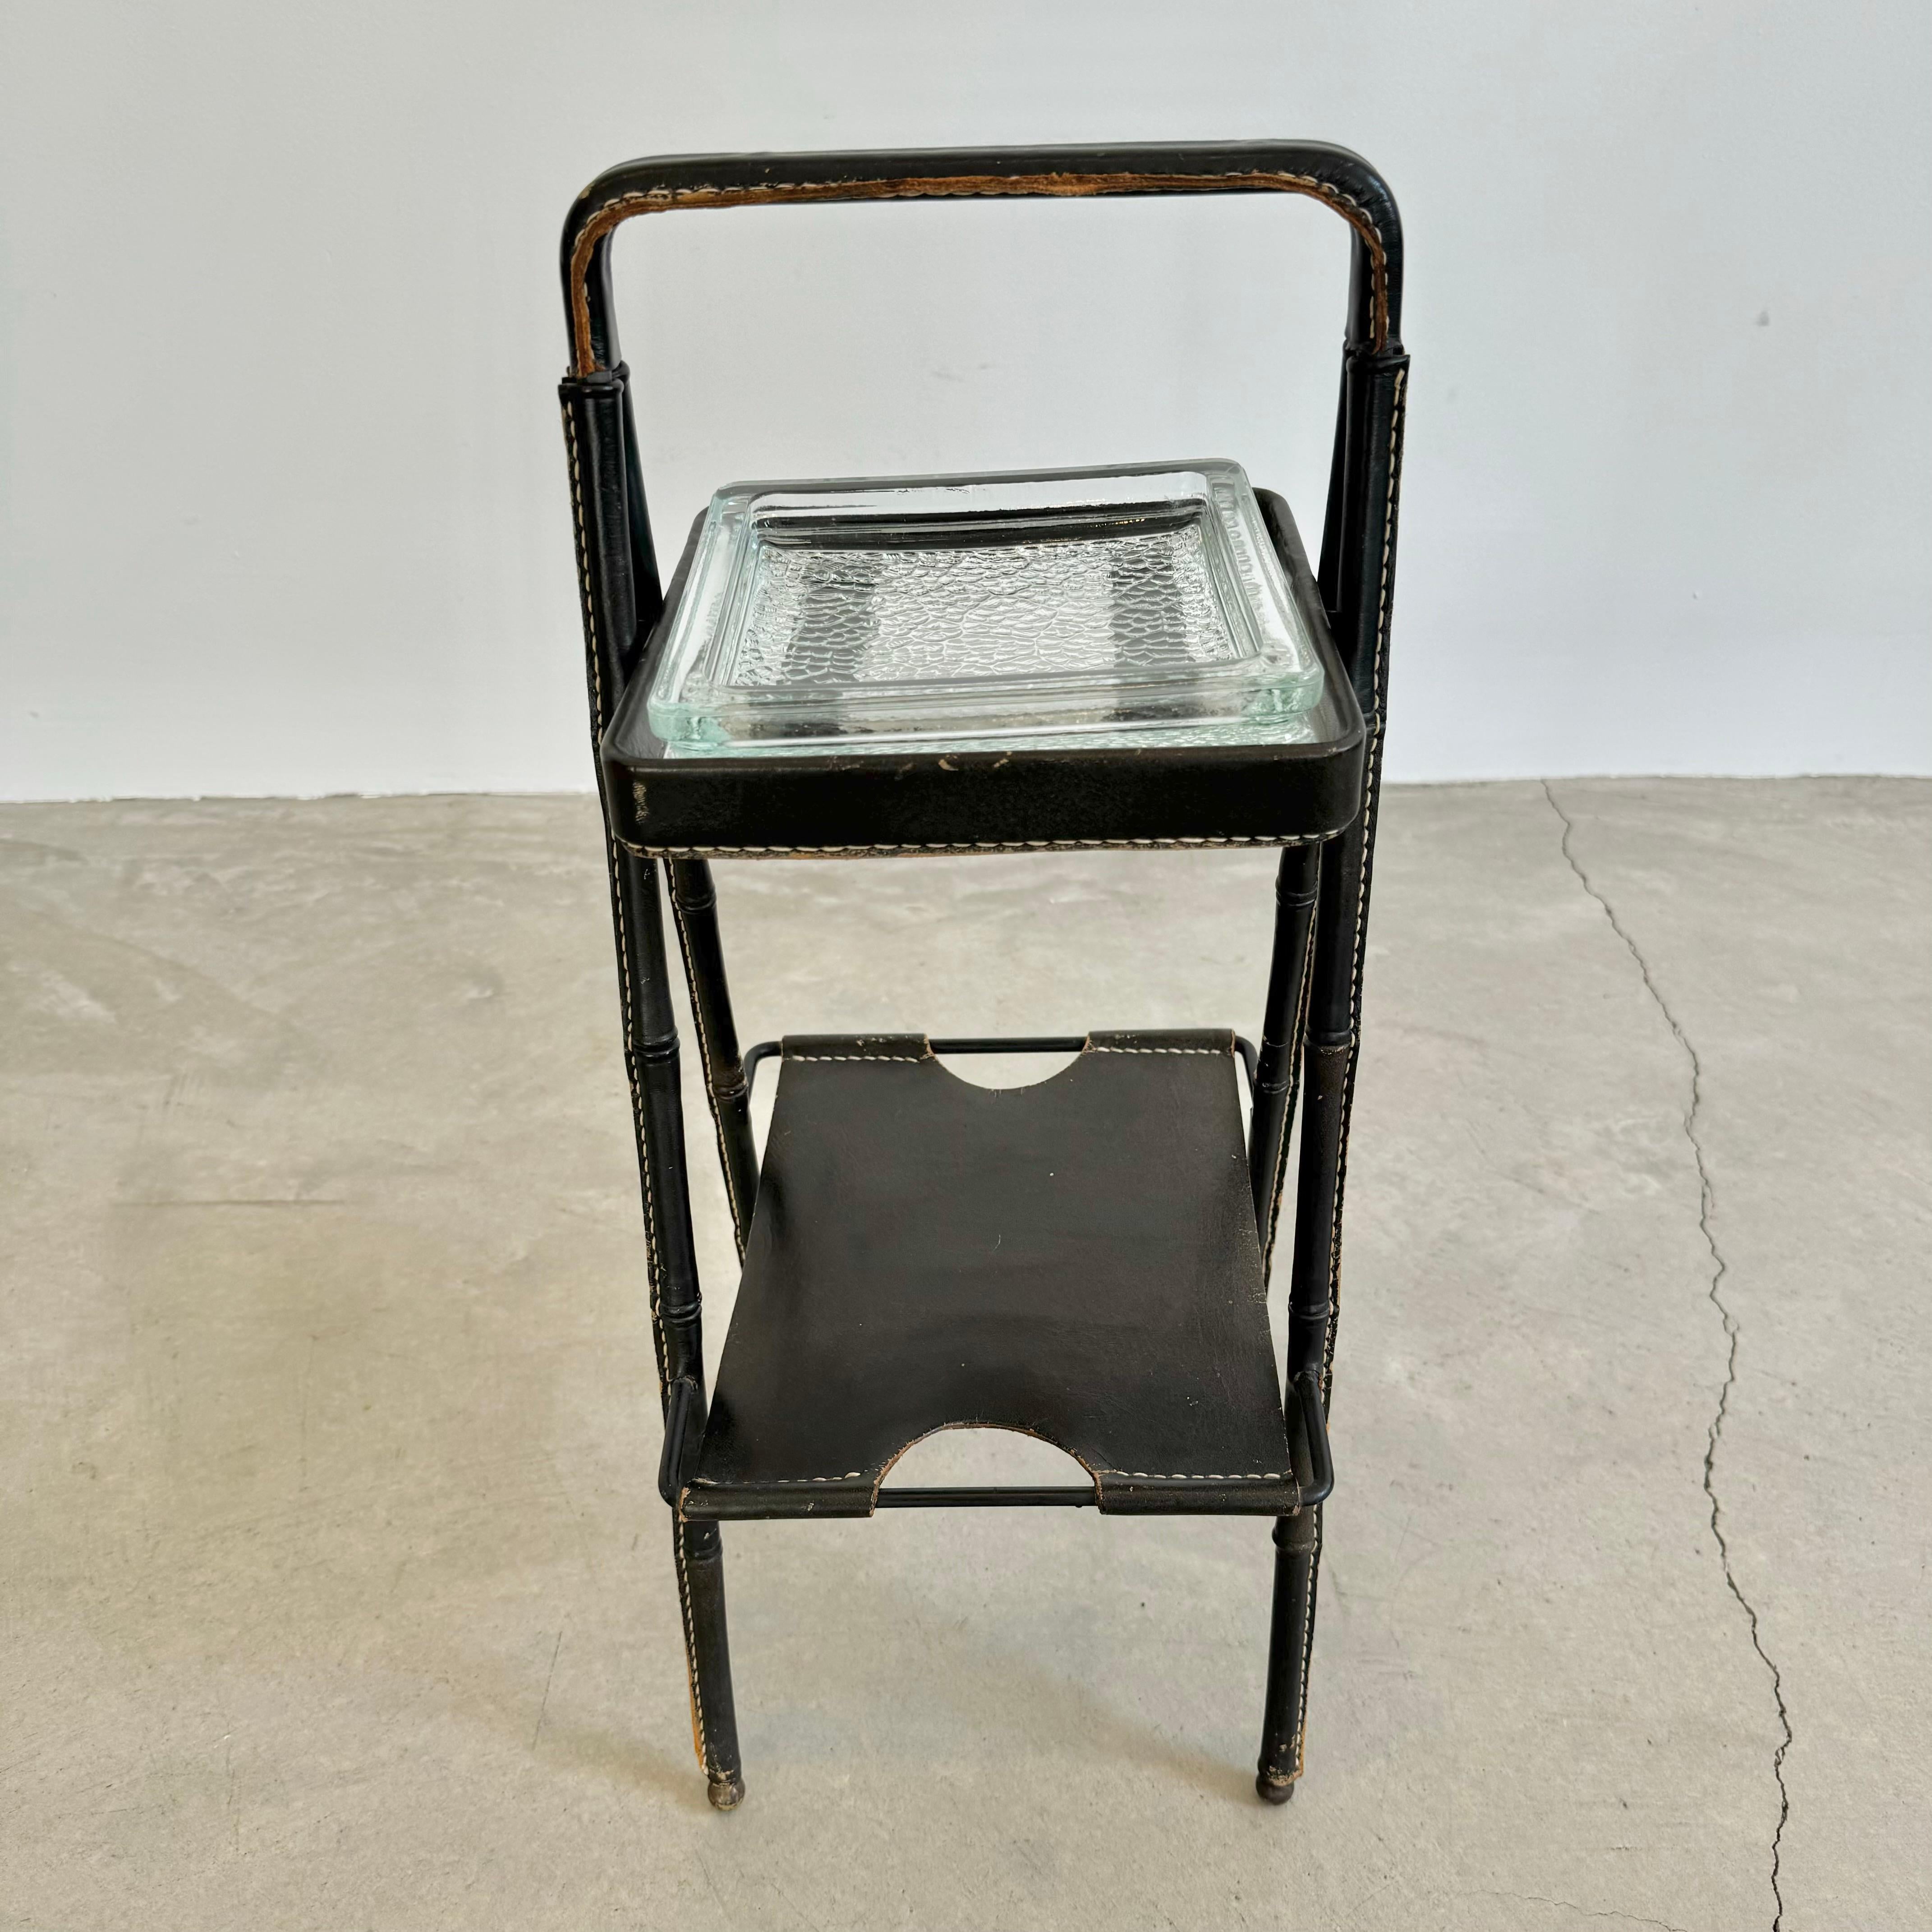 Mid-20th Century Jacques Adnet Leather Side Table or Catchall, 1950s France For Sale